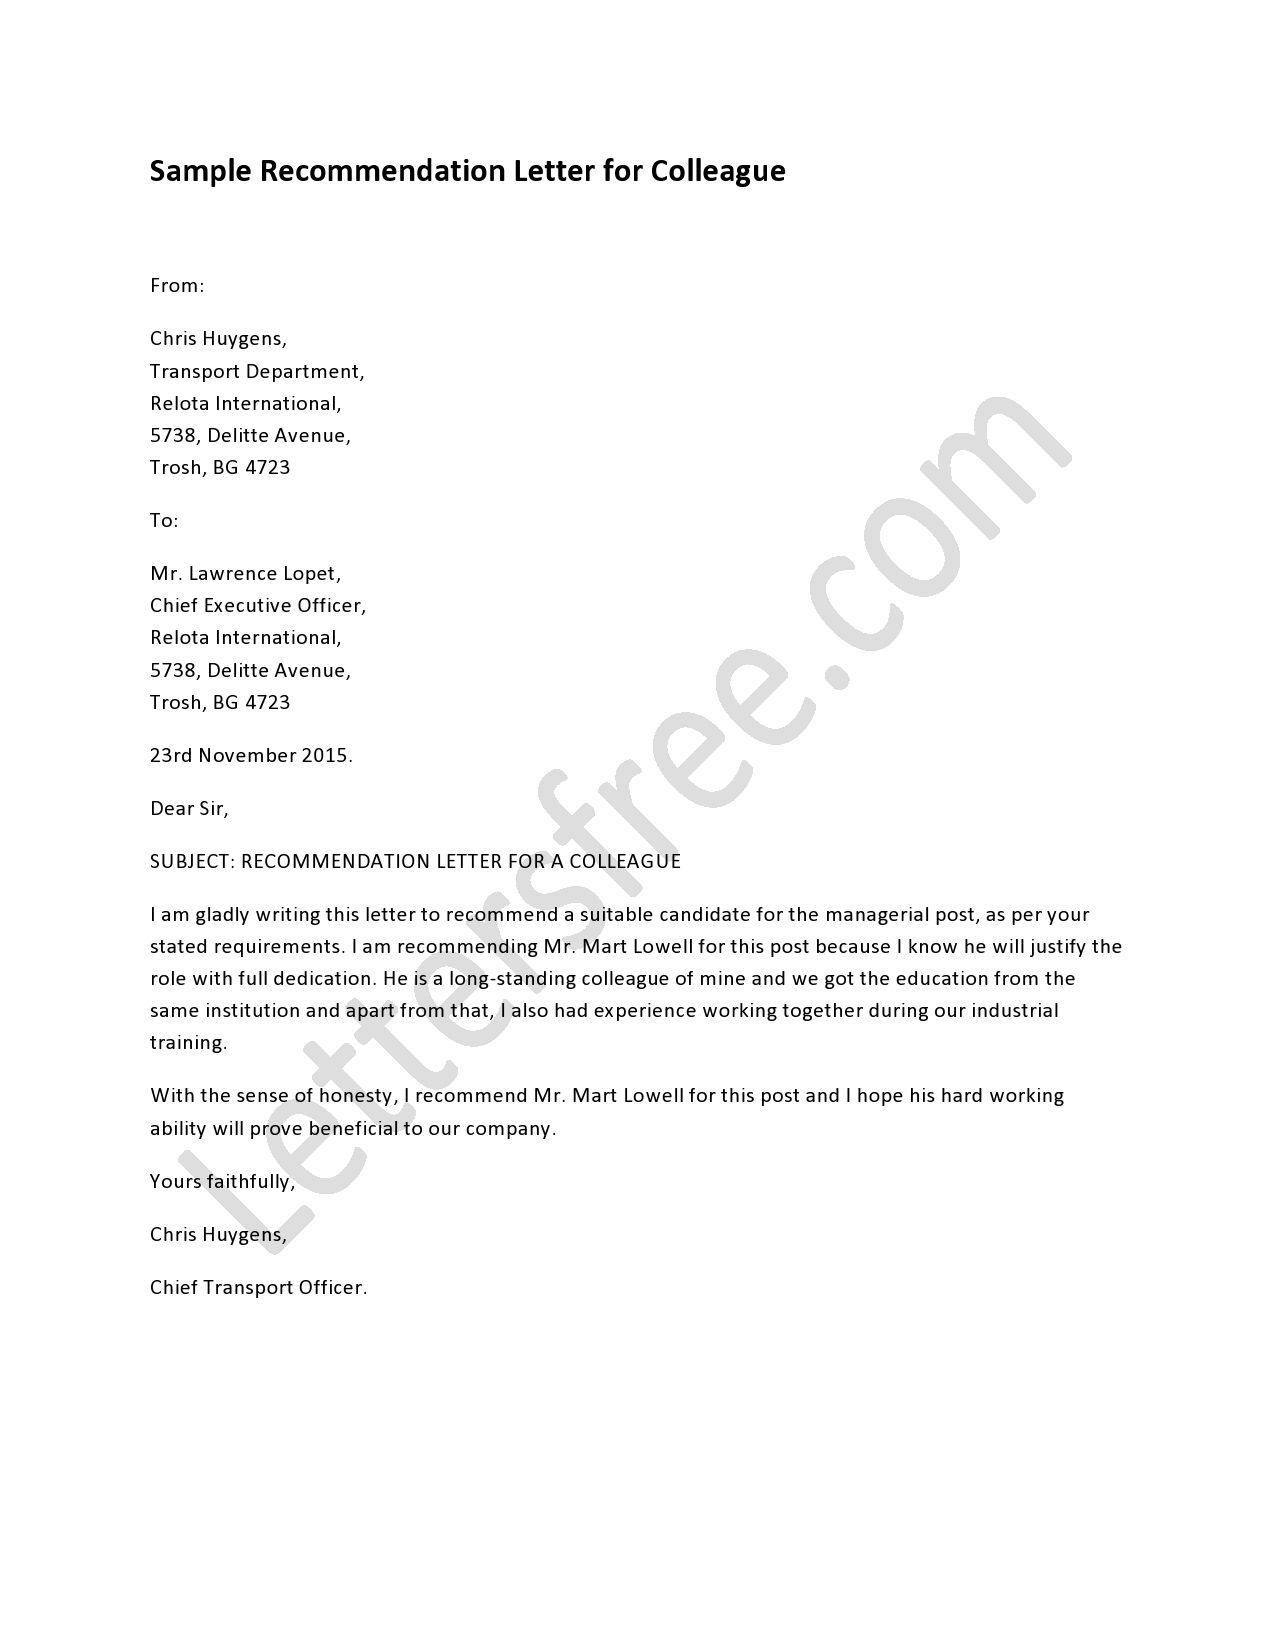 Recommendation Letter For Colleague Lettering Writing A in proportions 1275 X 1650